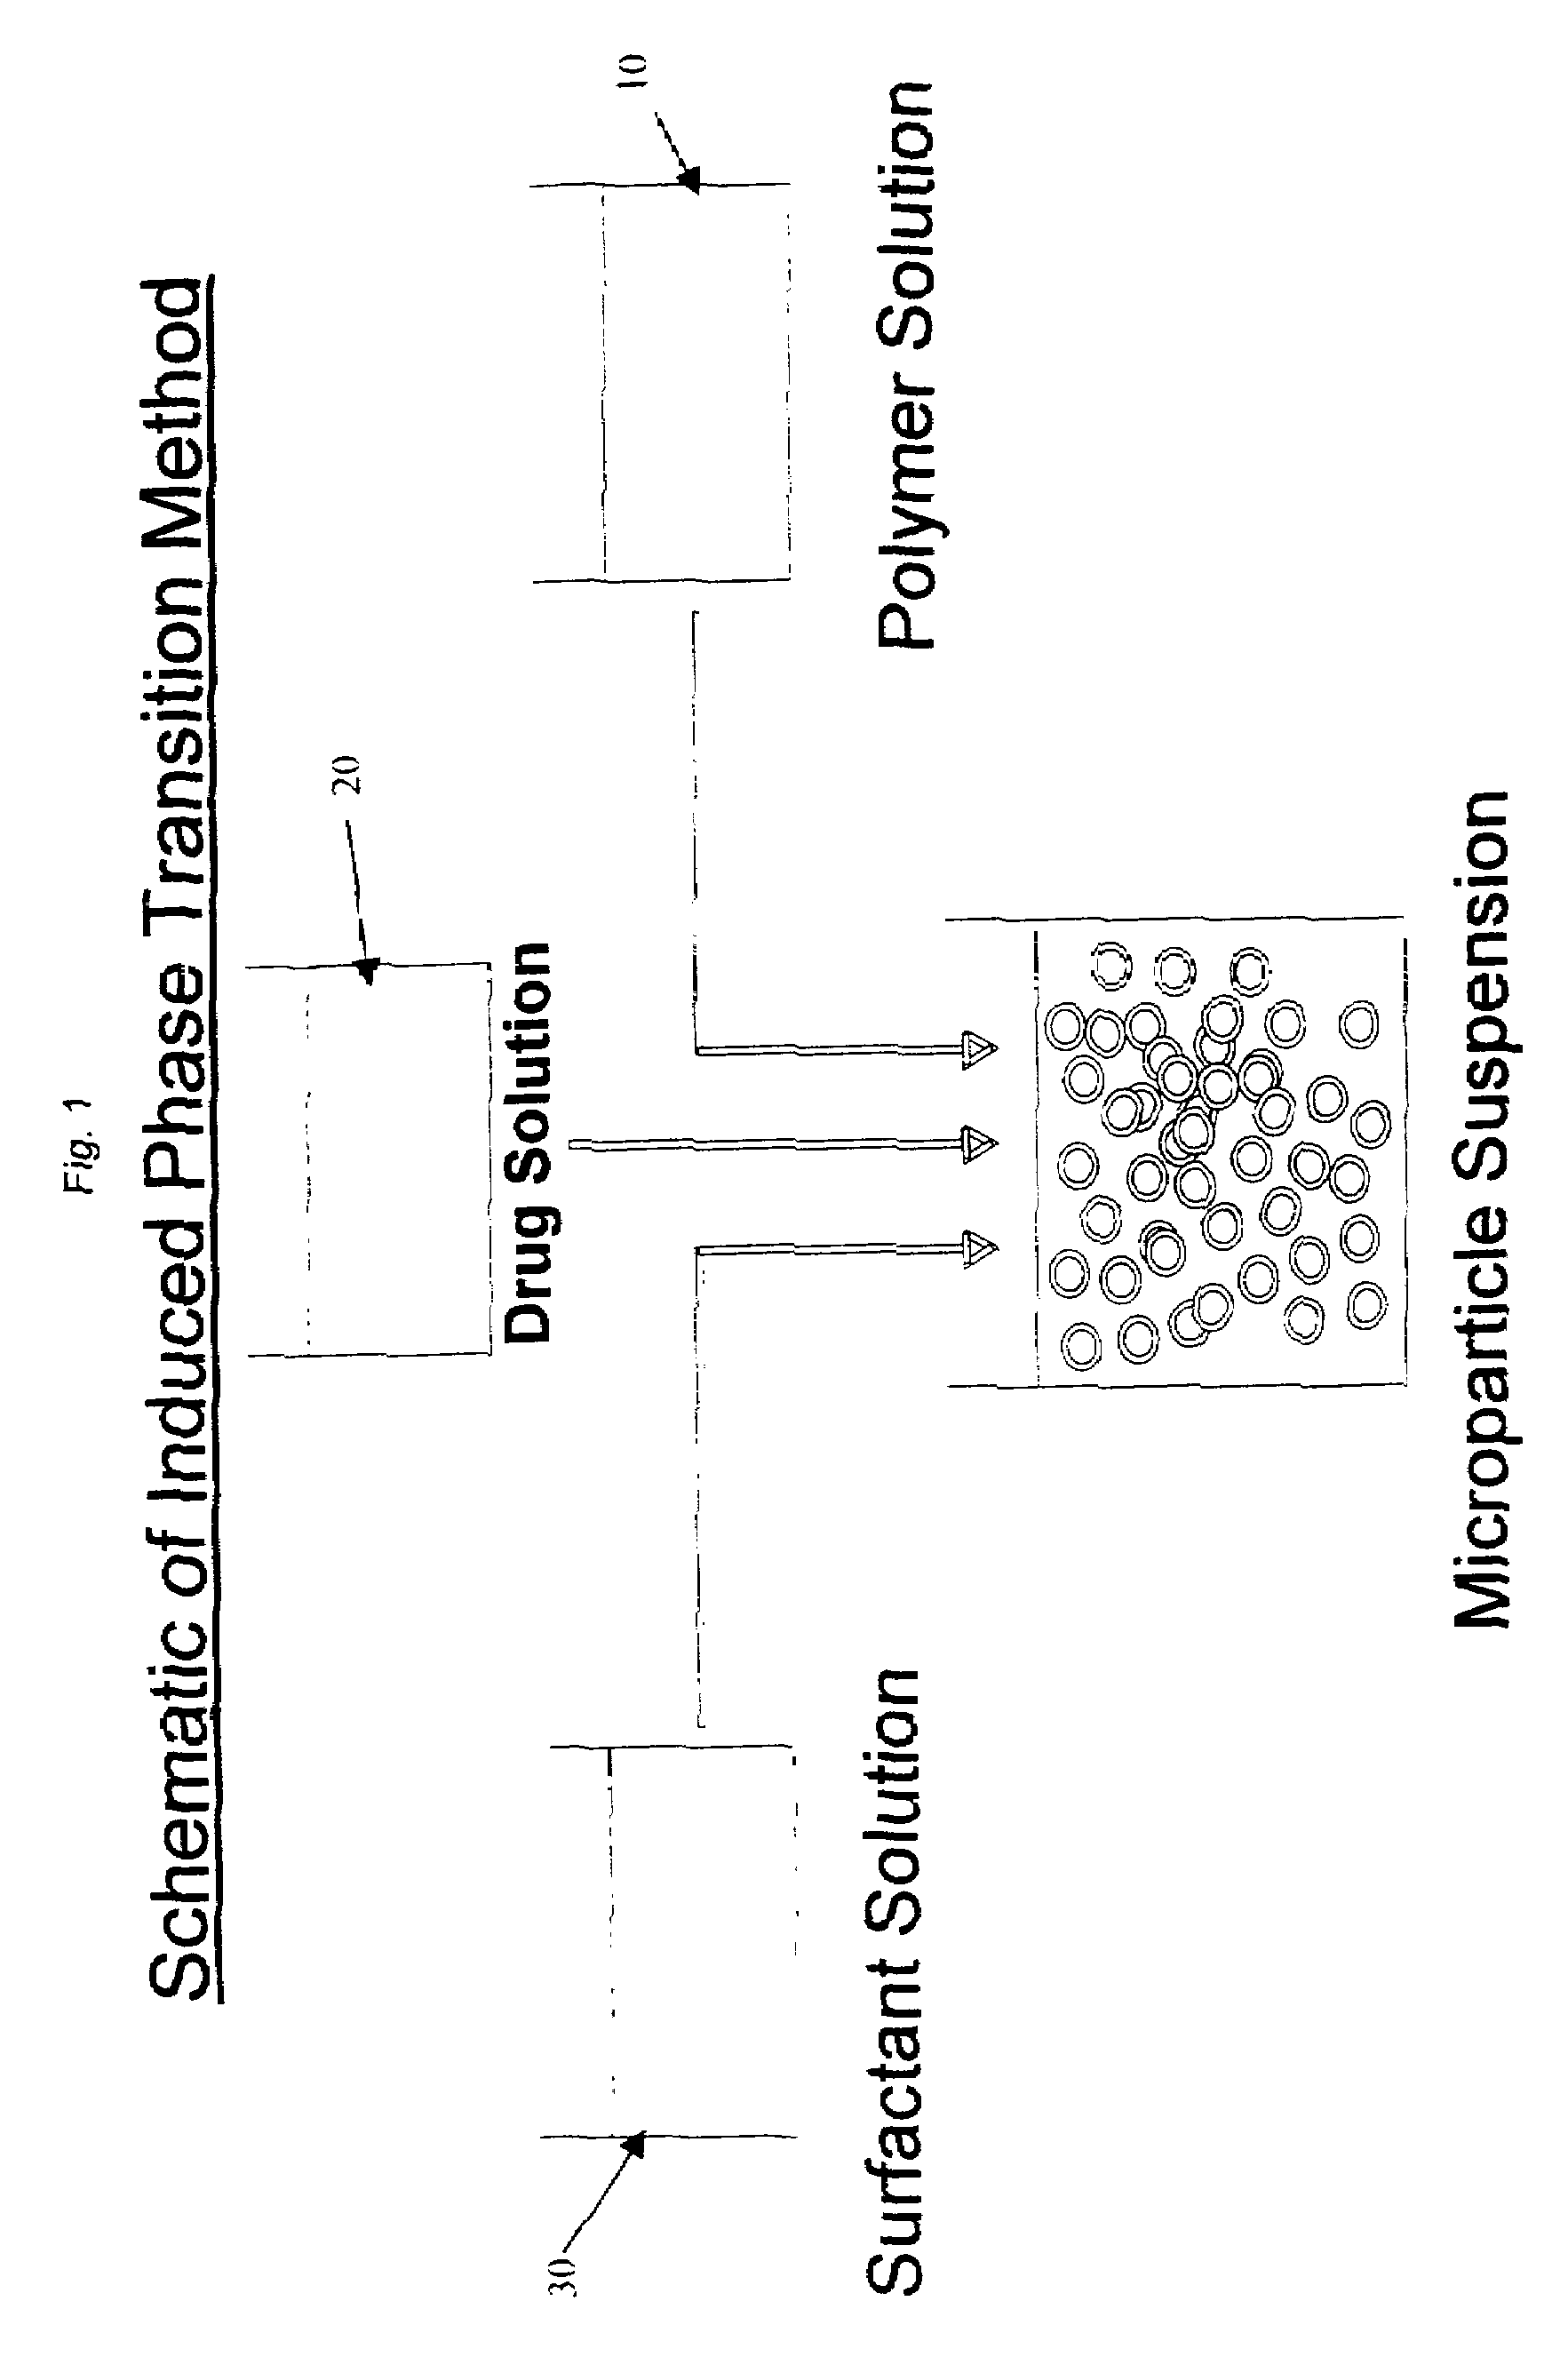 Induced phase transition method for the production of microparticles containing hydrophilic active agents